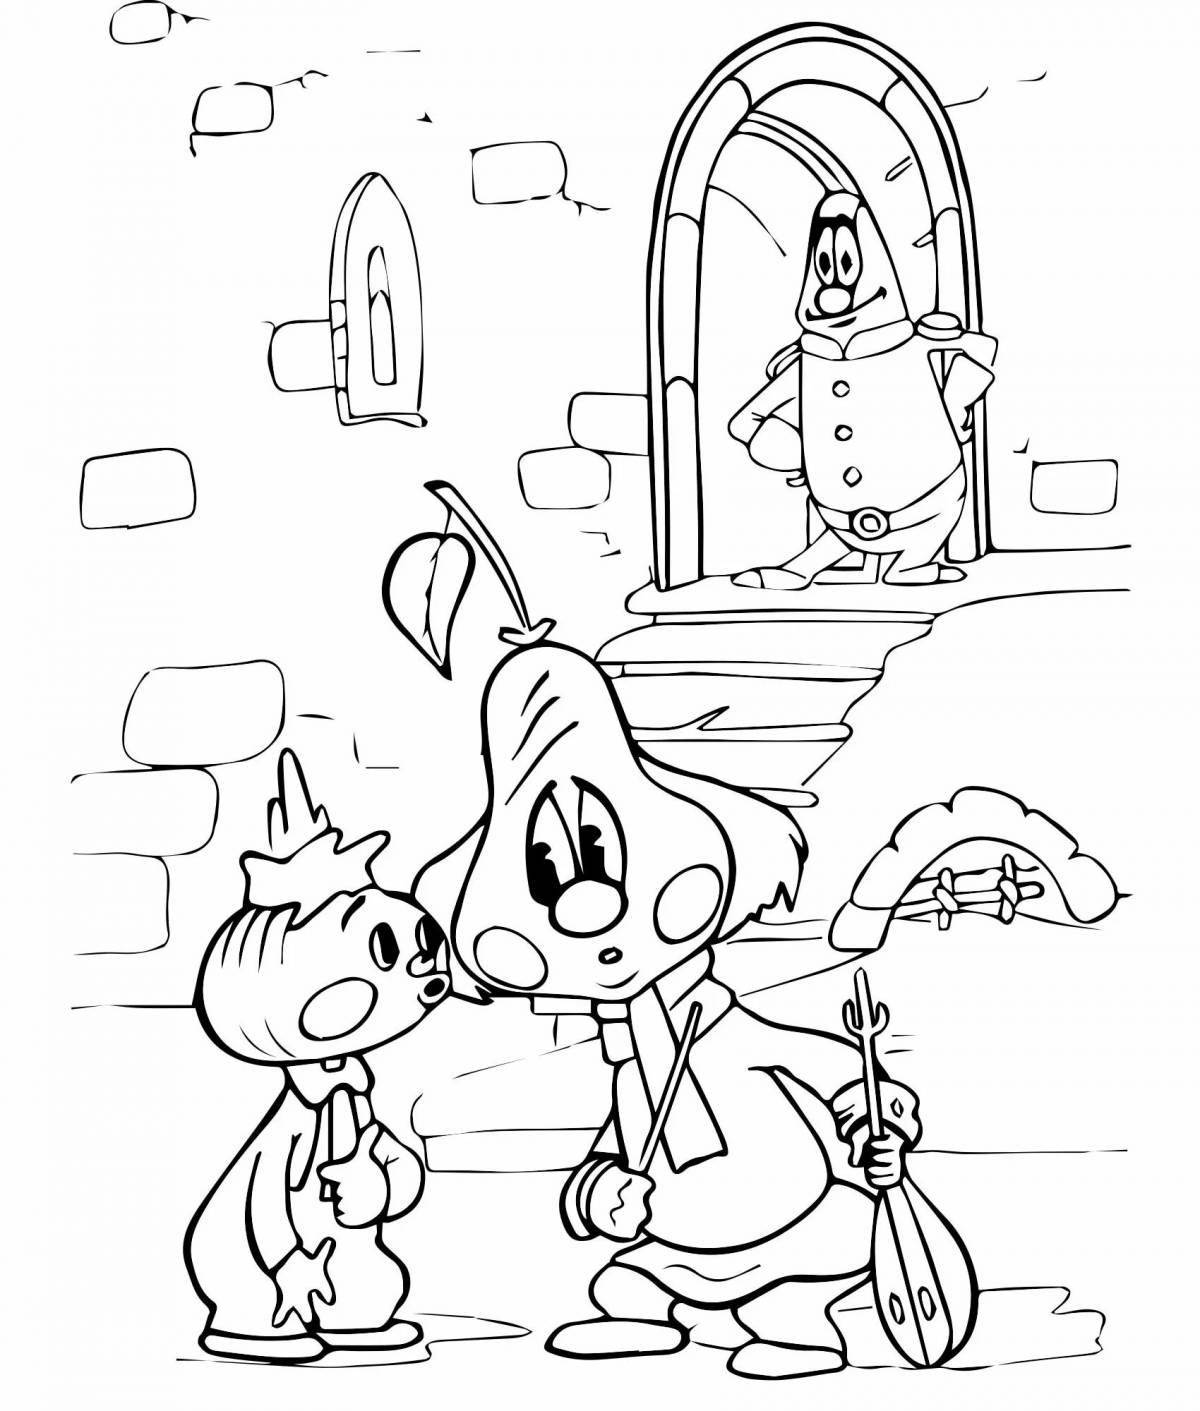 Sweet chippolino coloring page